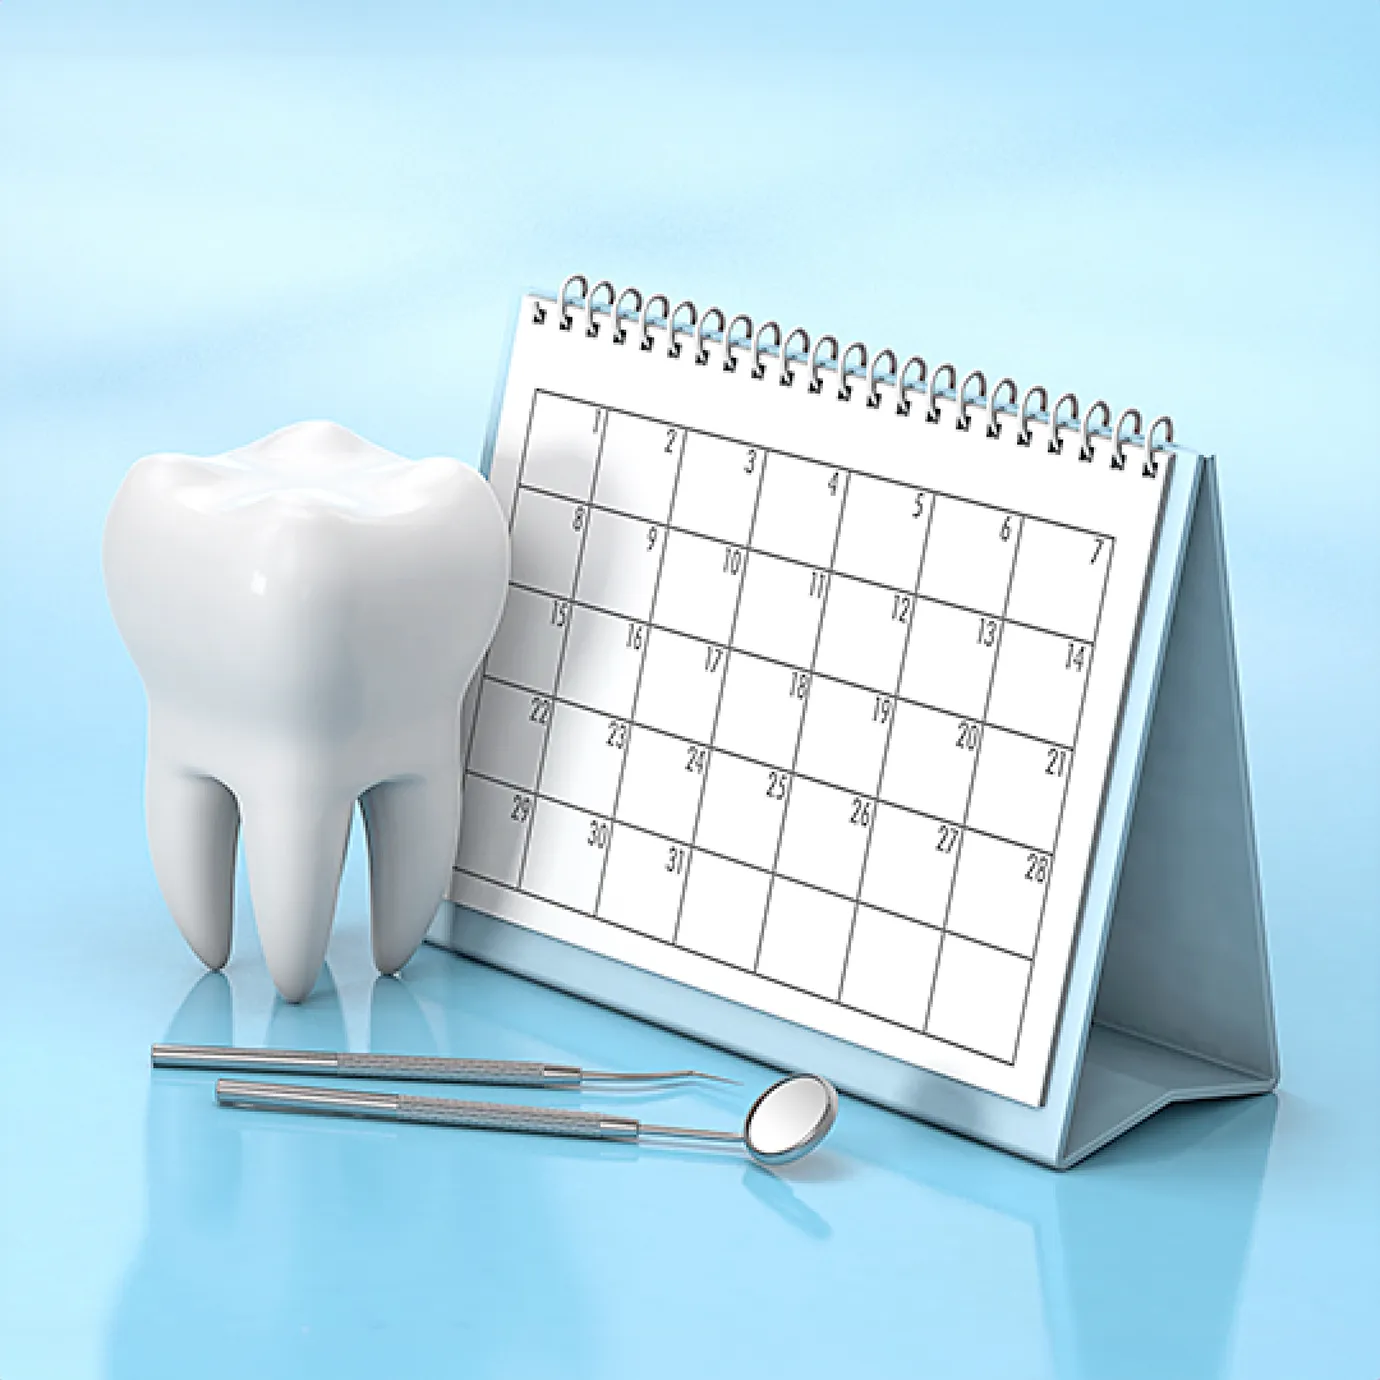 What can be done for tooth pain?